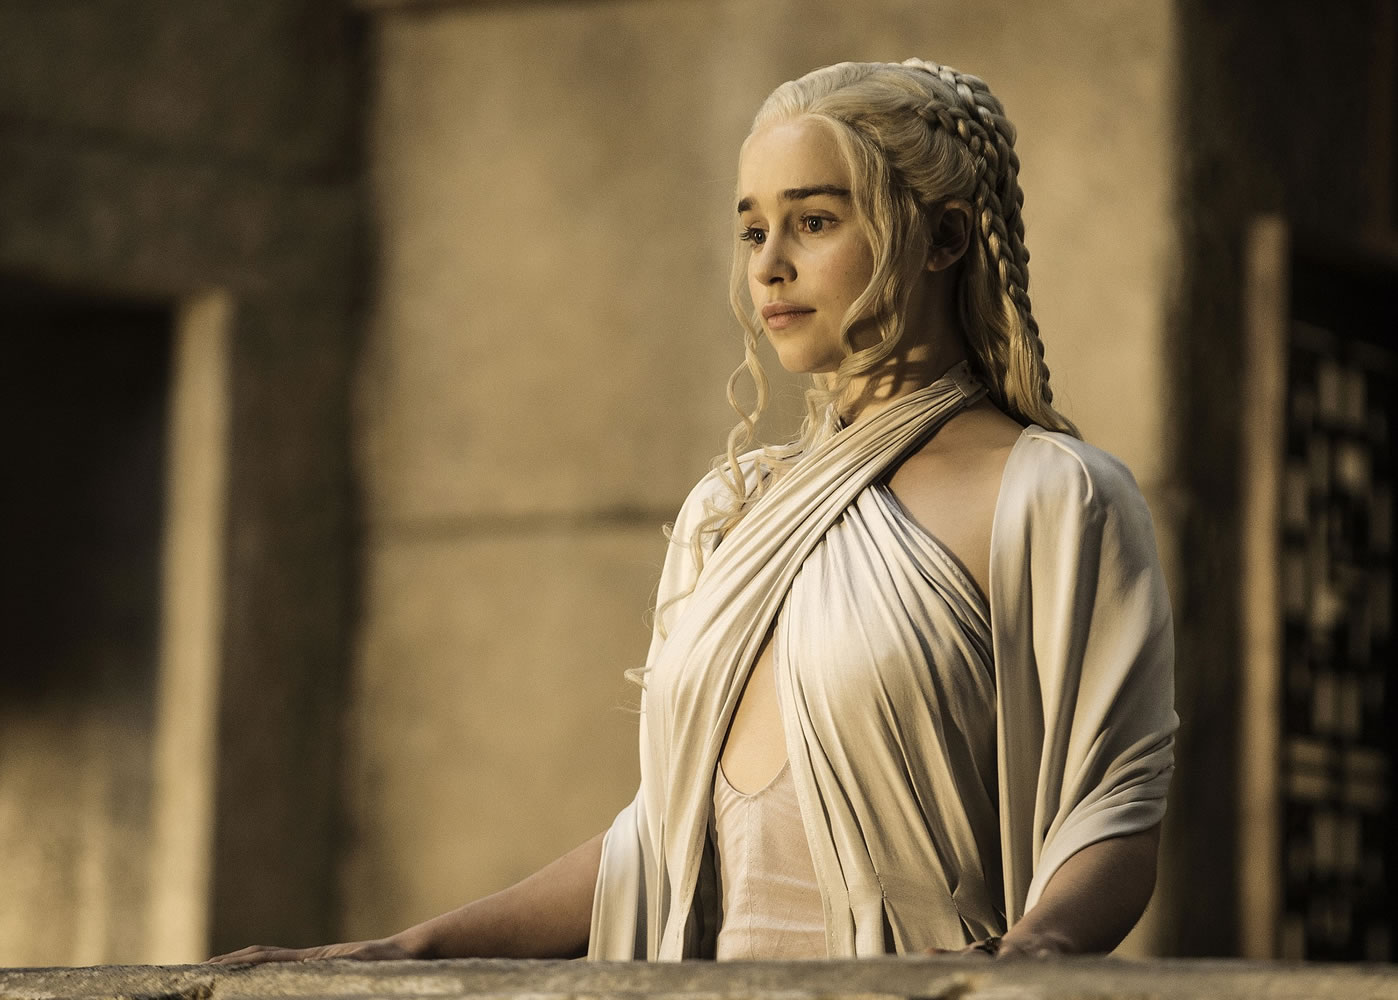 Emilia Clarke was nominated for an Emmy Award on Thursday for outstanding supporting actress in a drama series for her role on &quot;Game of Thrones.&quot; The 67th Annual Primetime Emmy Awards will take place on Sept.